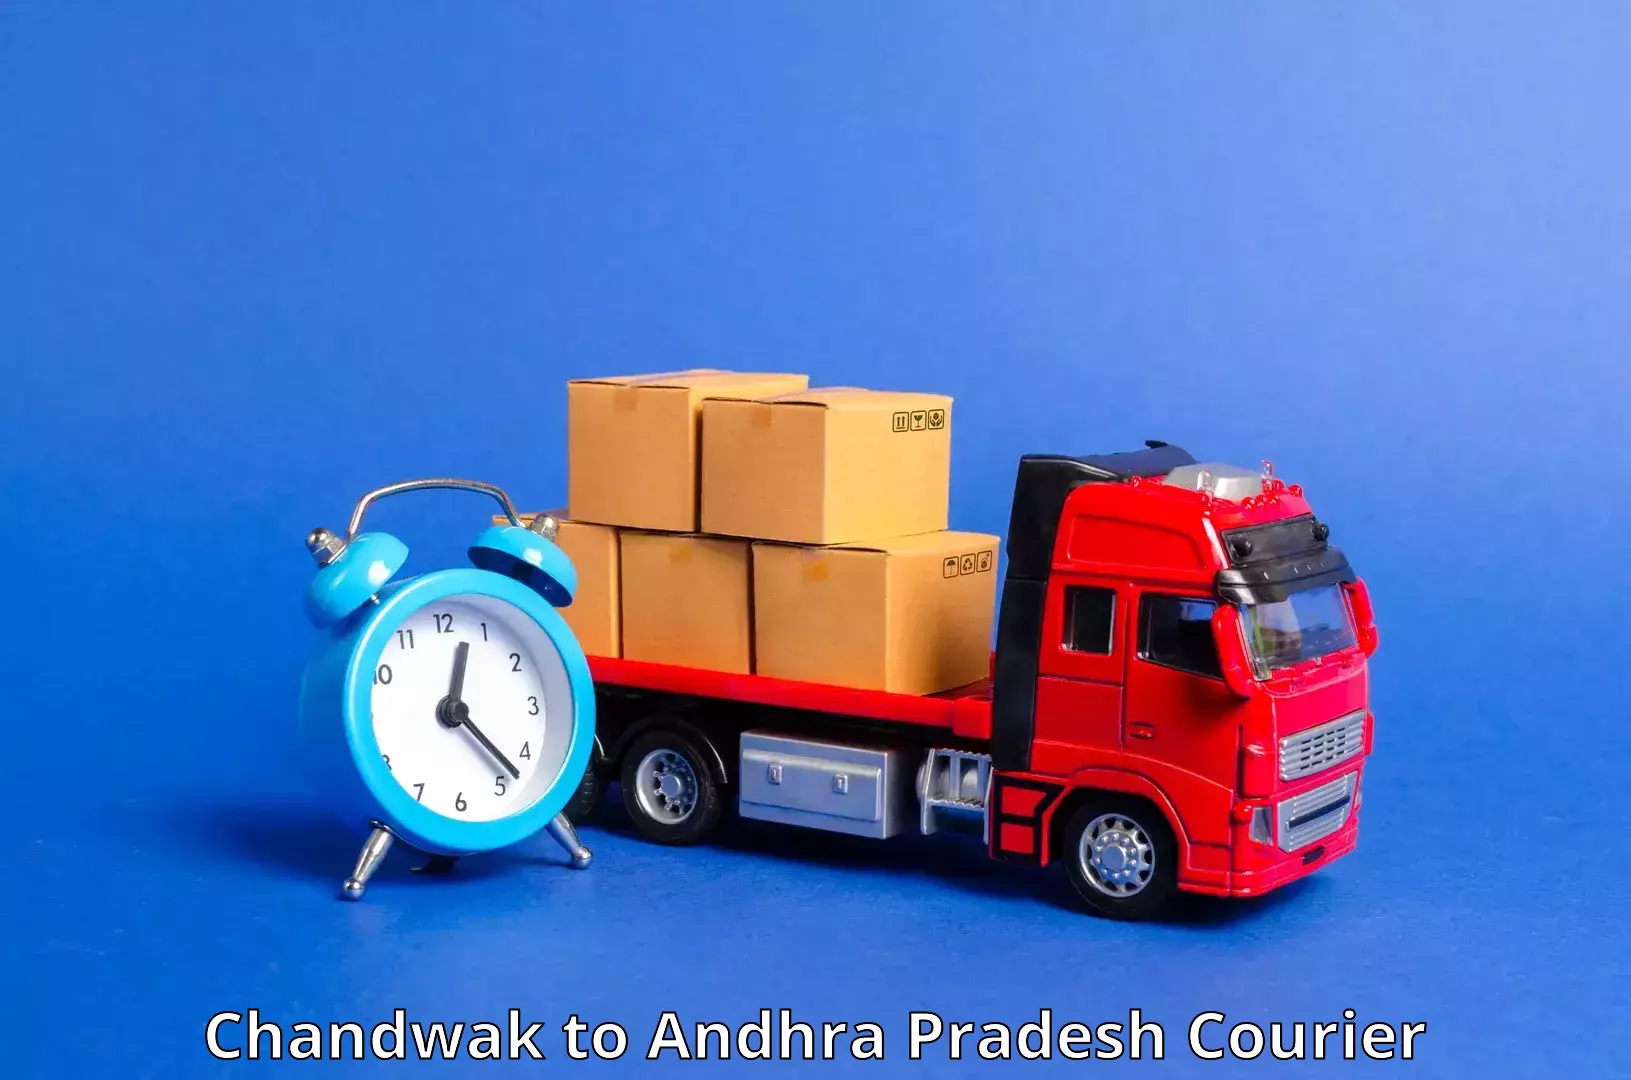 Same-day delivery solutions Chandwak to Gorantla